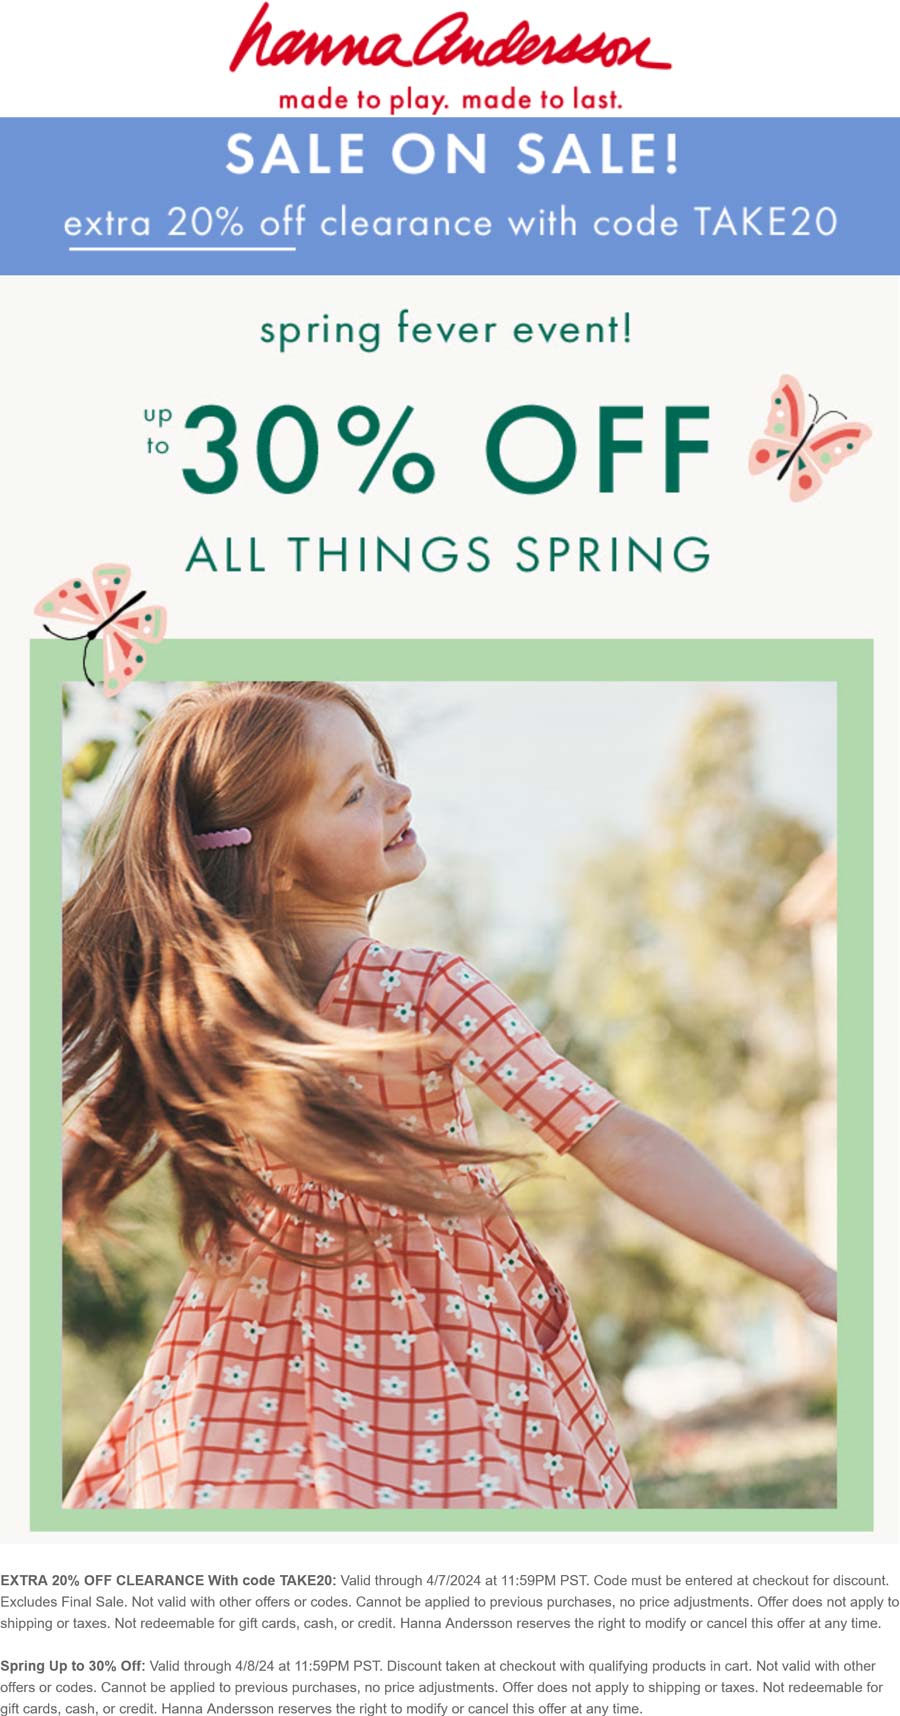 Hanna Anderson stores Coupon  Extra 20% off clearance at Hanna Anderson via promo code TAKE20 #hannaanderson 